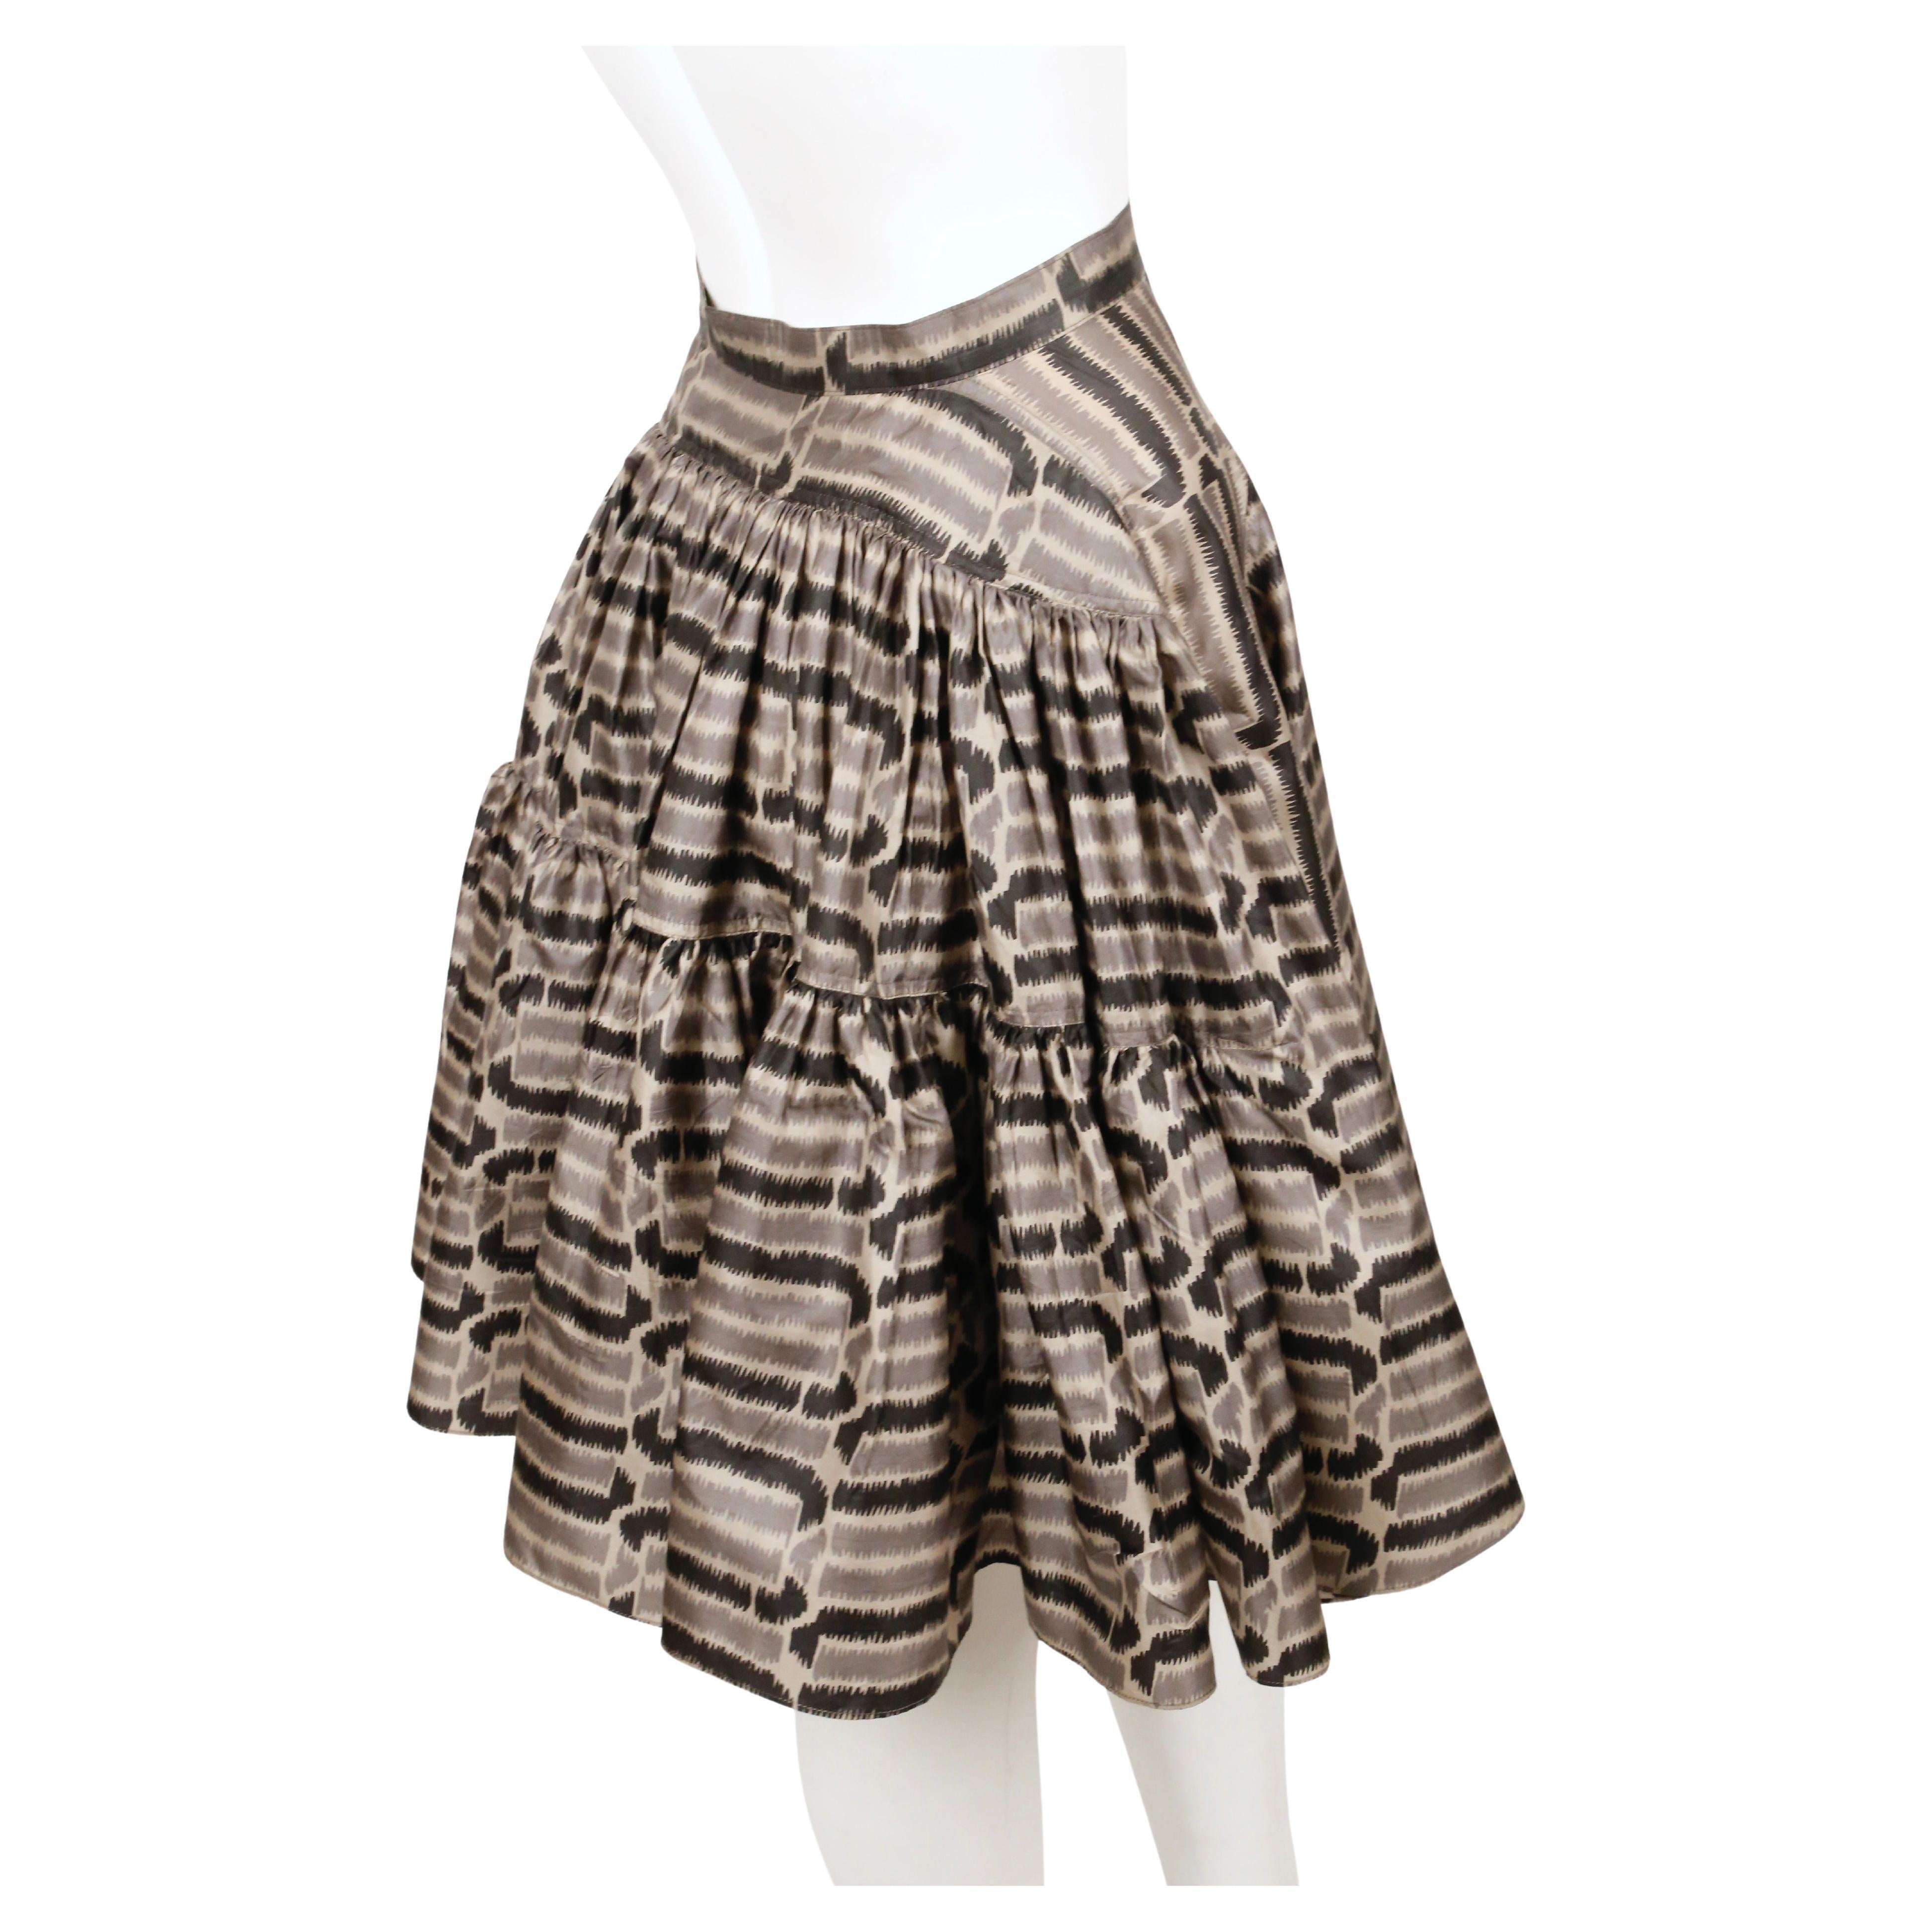 1987 AZZEDINE ALAIA 'Basque' runway skirt with artwork by Christoph von Weyhe  In Good Condition For Sale In San Fransisco, CA